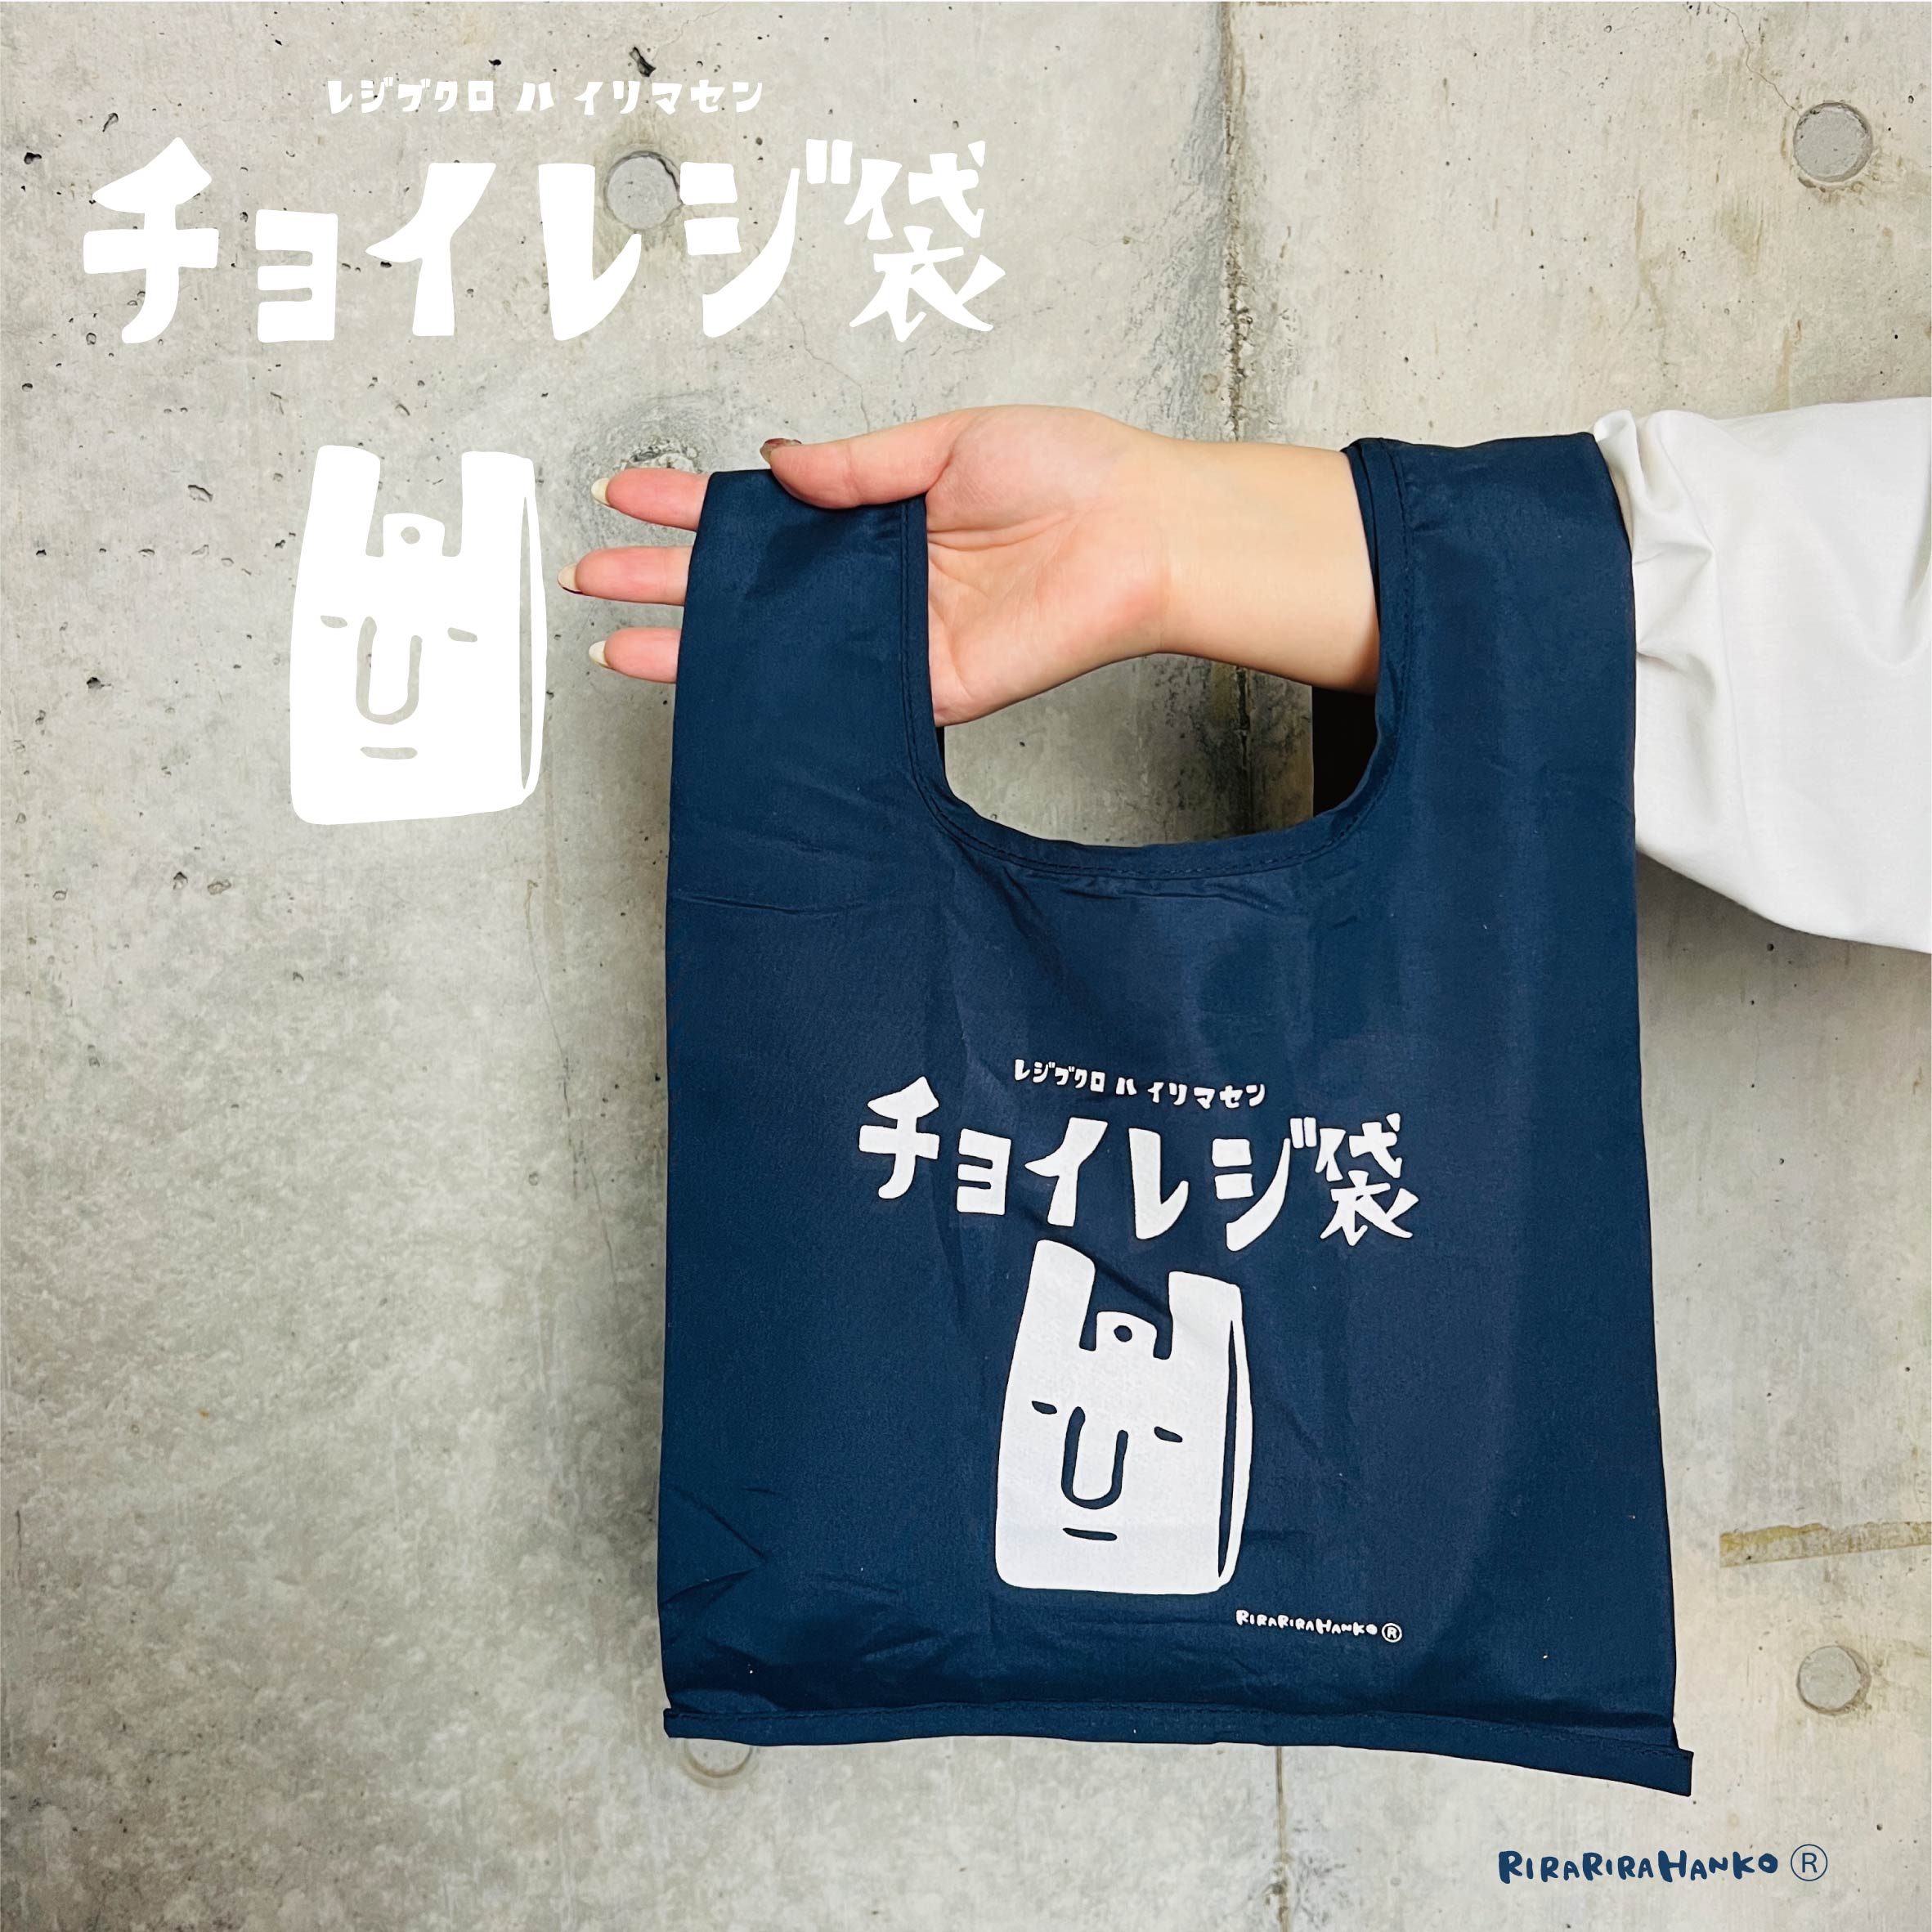 Just-the-Right-Amount Bag Mini Eco Bag (Navy)